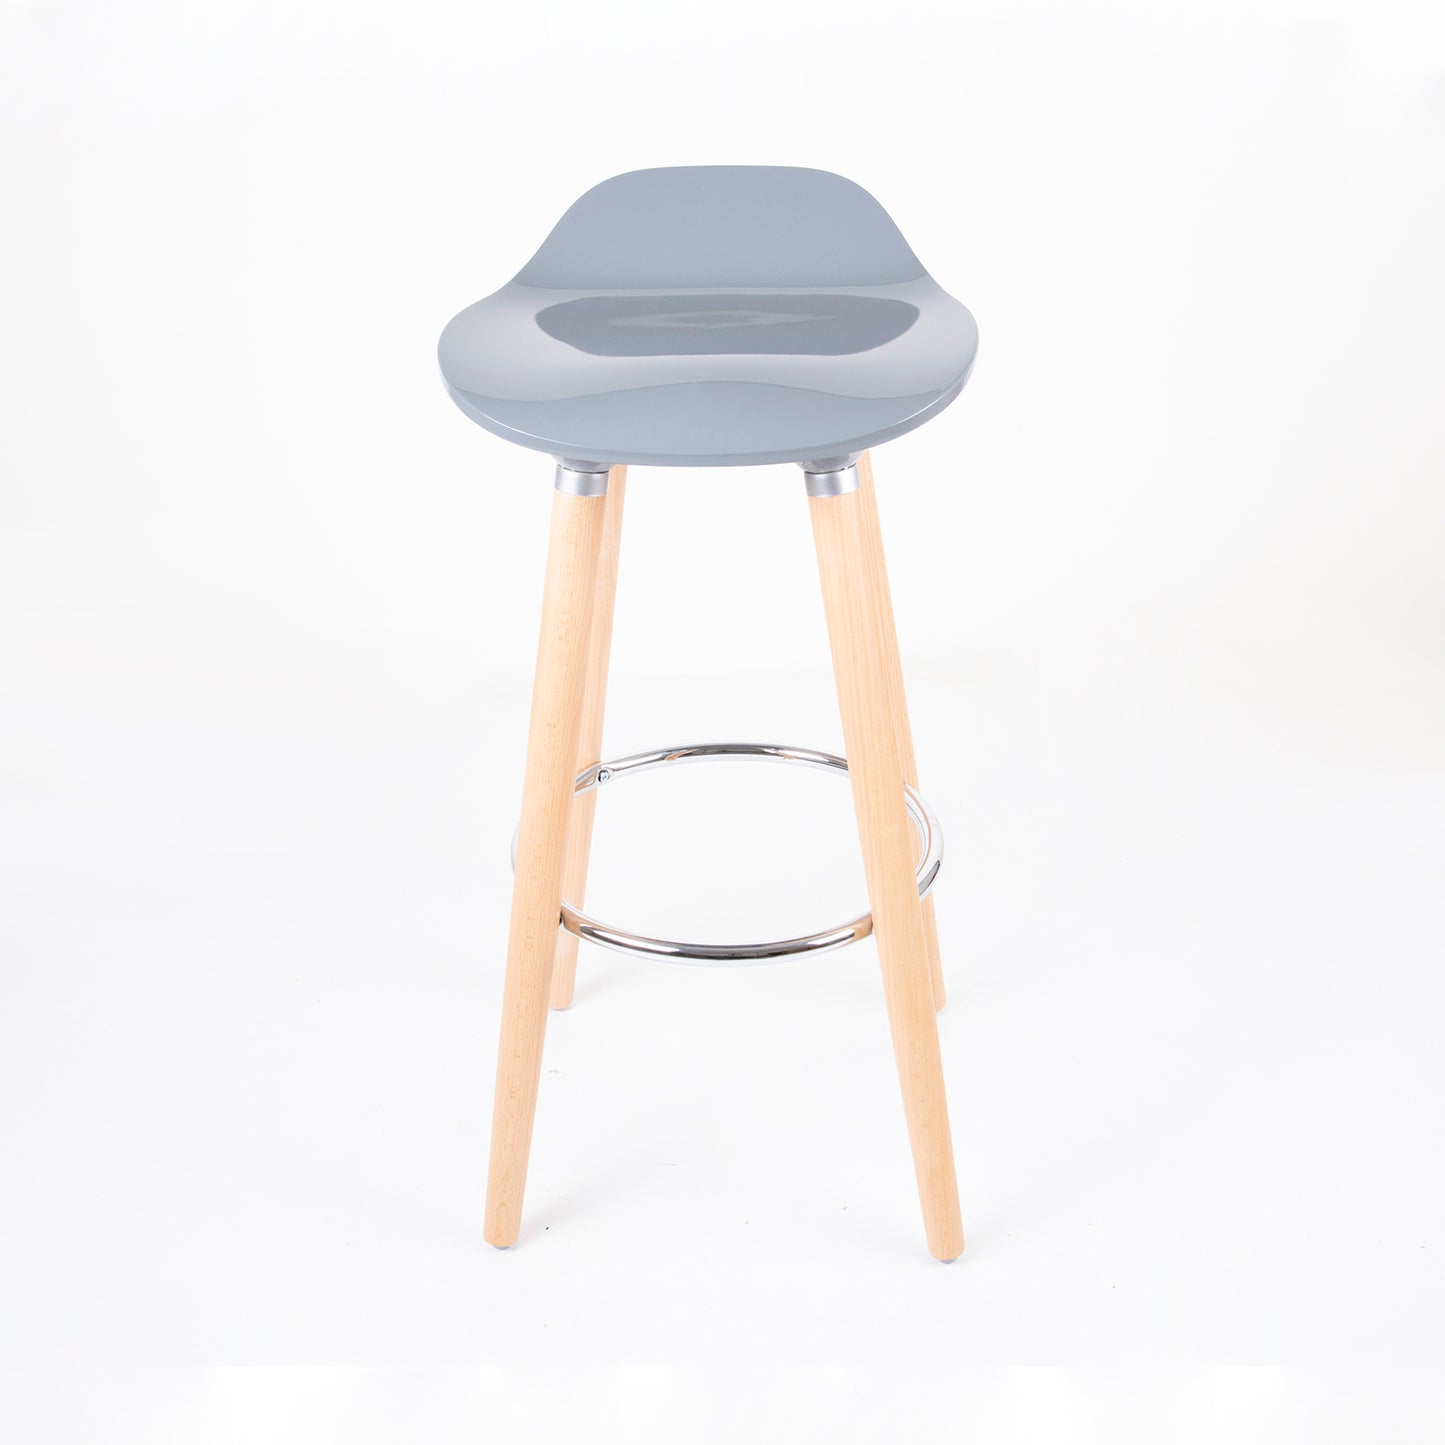 Pack of 2 ABS Bar Stool Round - Light Grey